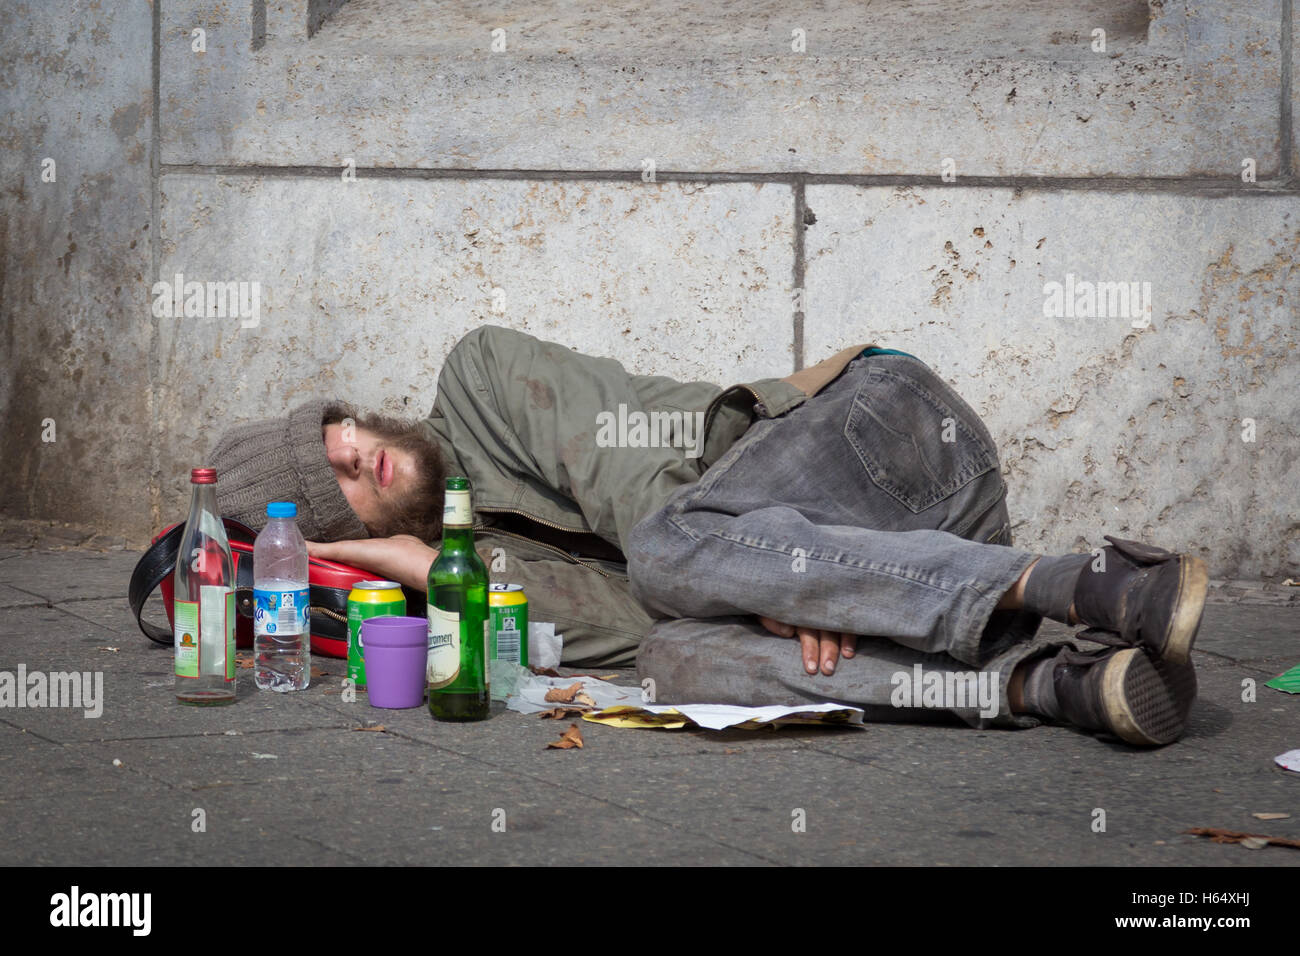 Berlin, Germany - Sept 18: Homeless young alcohol addict lying drunk on street sidewalk on 18th of September ,2016 in Berlin, Ge Stock Photo